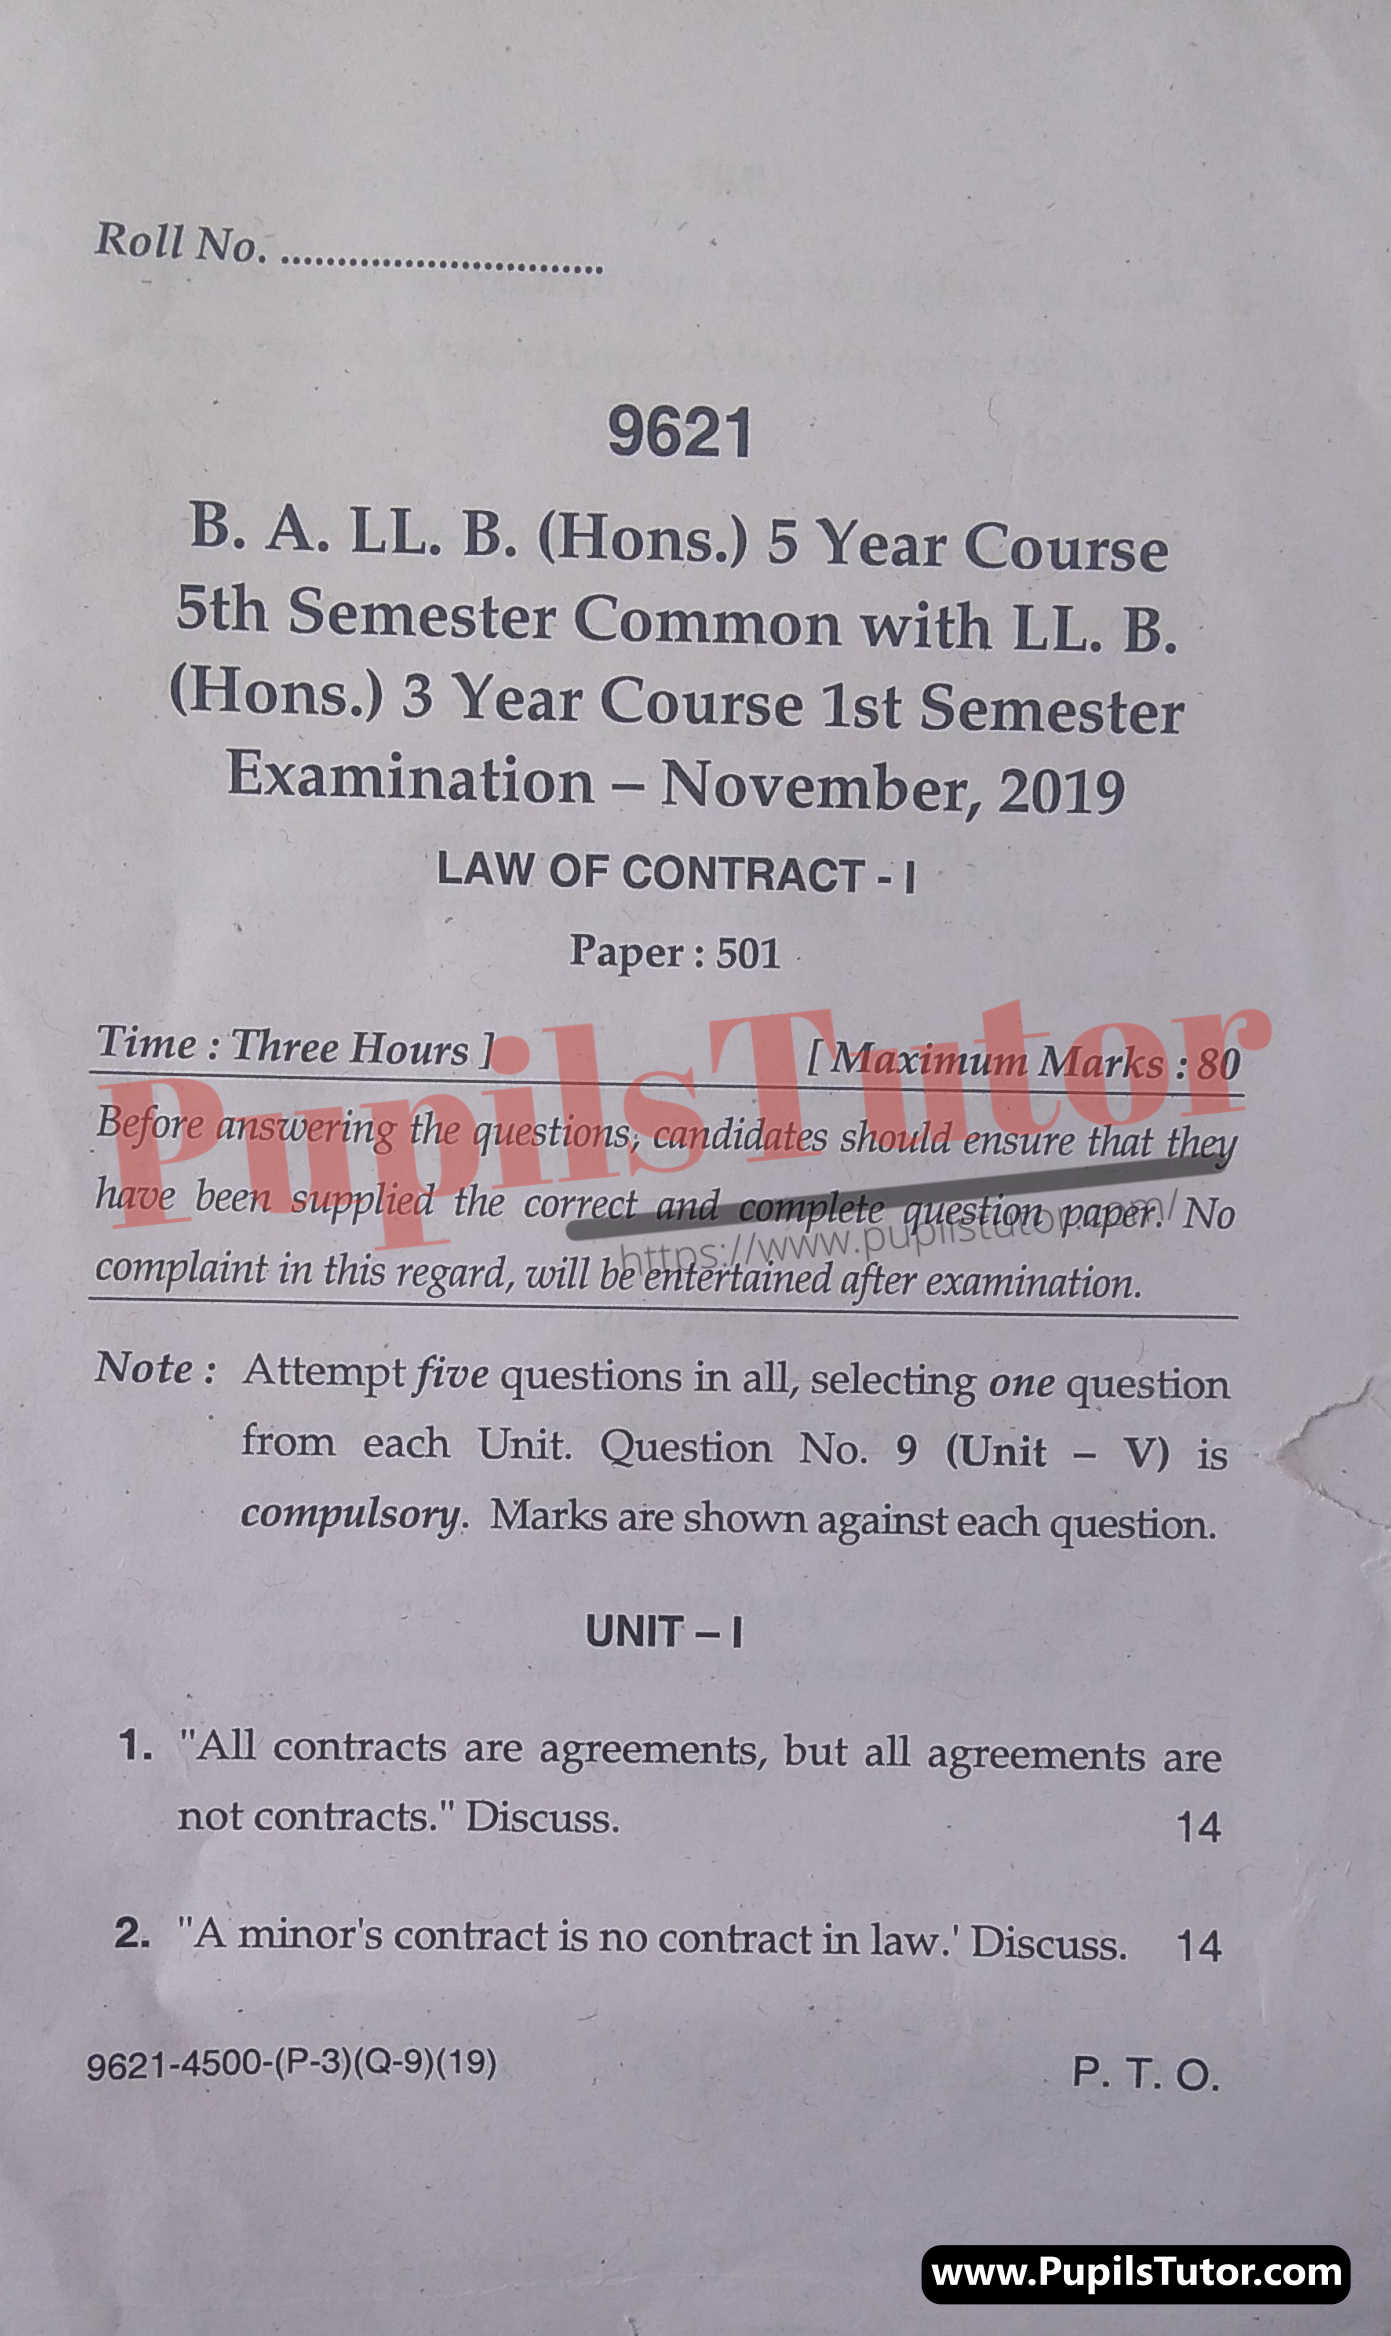 MDU (Maharshi Dayanand University, Rohtak Haryana) LLB Regular Exam (Hons.) First Semester Previous Year Law Of Contract Question Paper For November, 2019 Exam (Question Paper Page 1) - pupilstutor.com